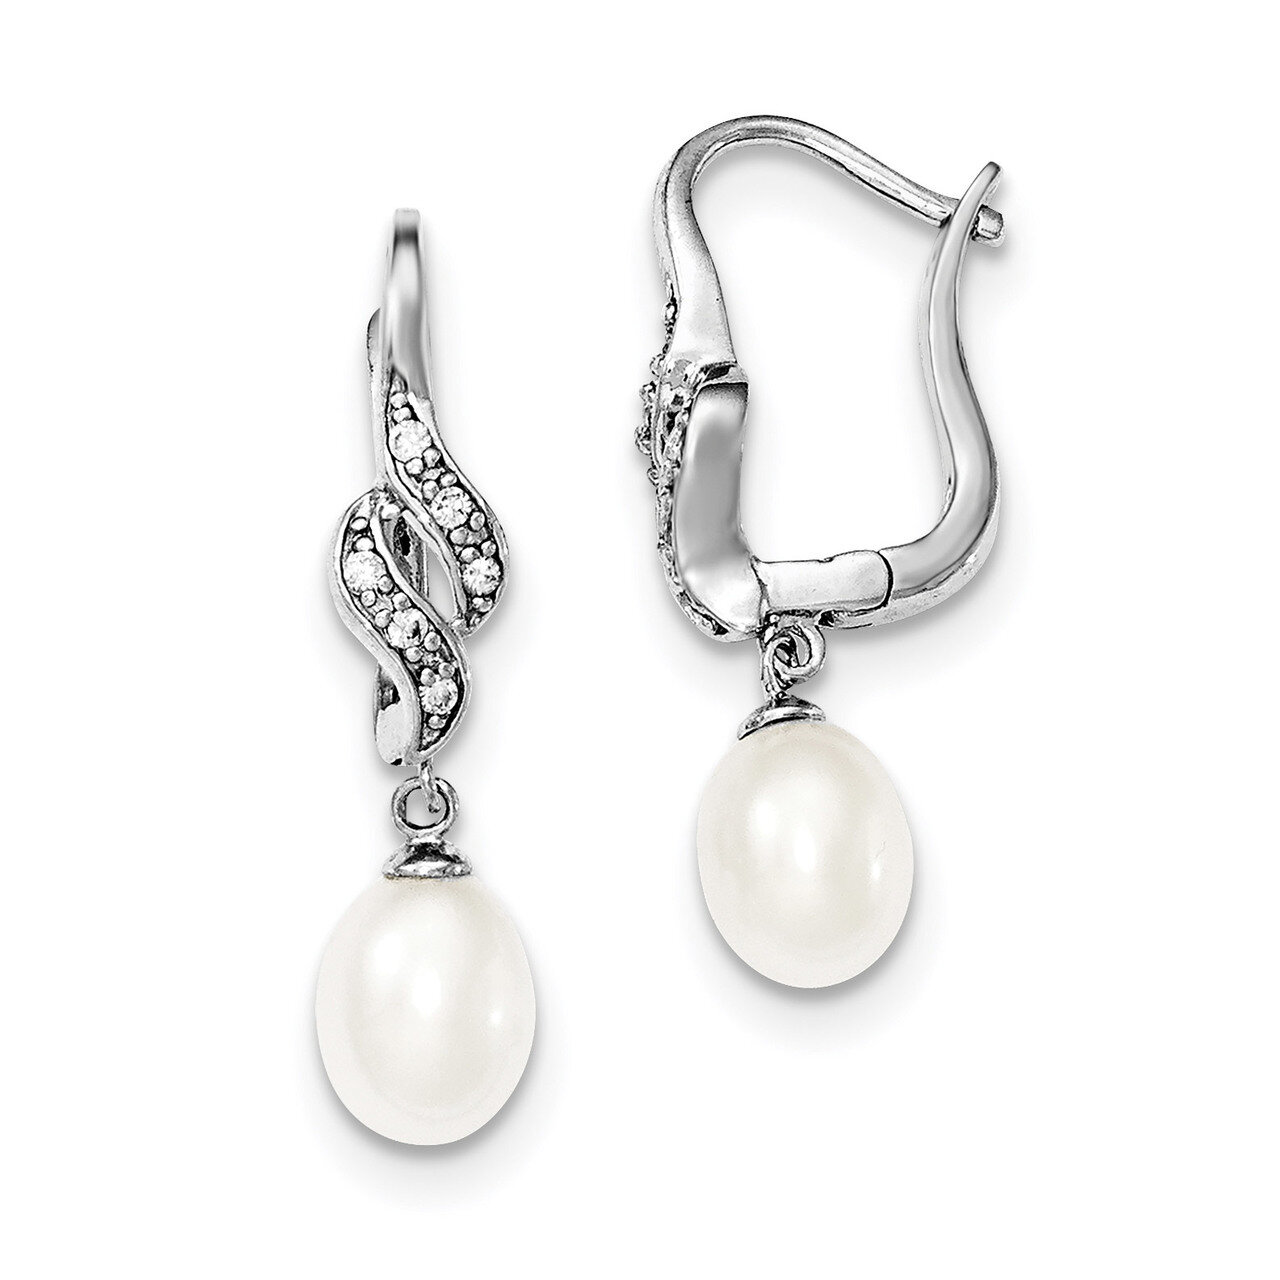 7-8mm White Cultured Freshwater Pearl CZ Diamond Leverback Earrings Sterling Silver Rhodium-plated QE12741